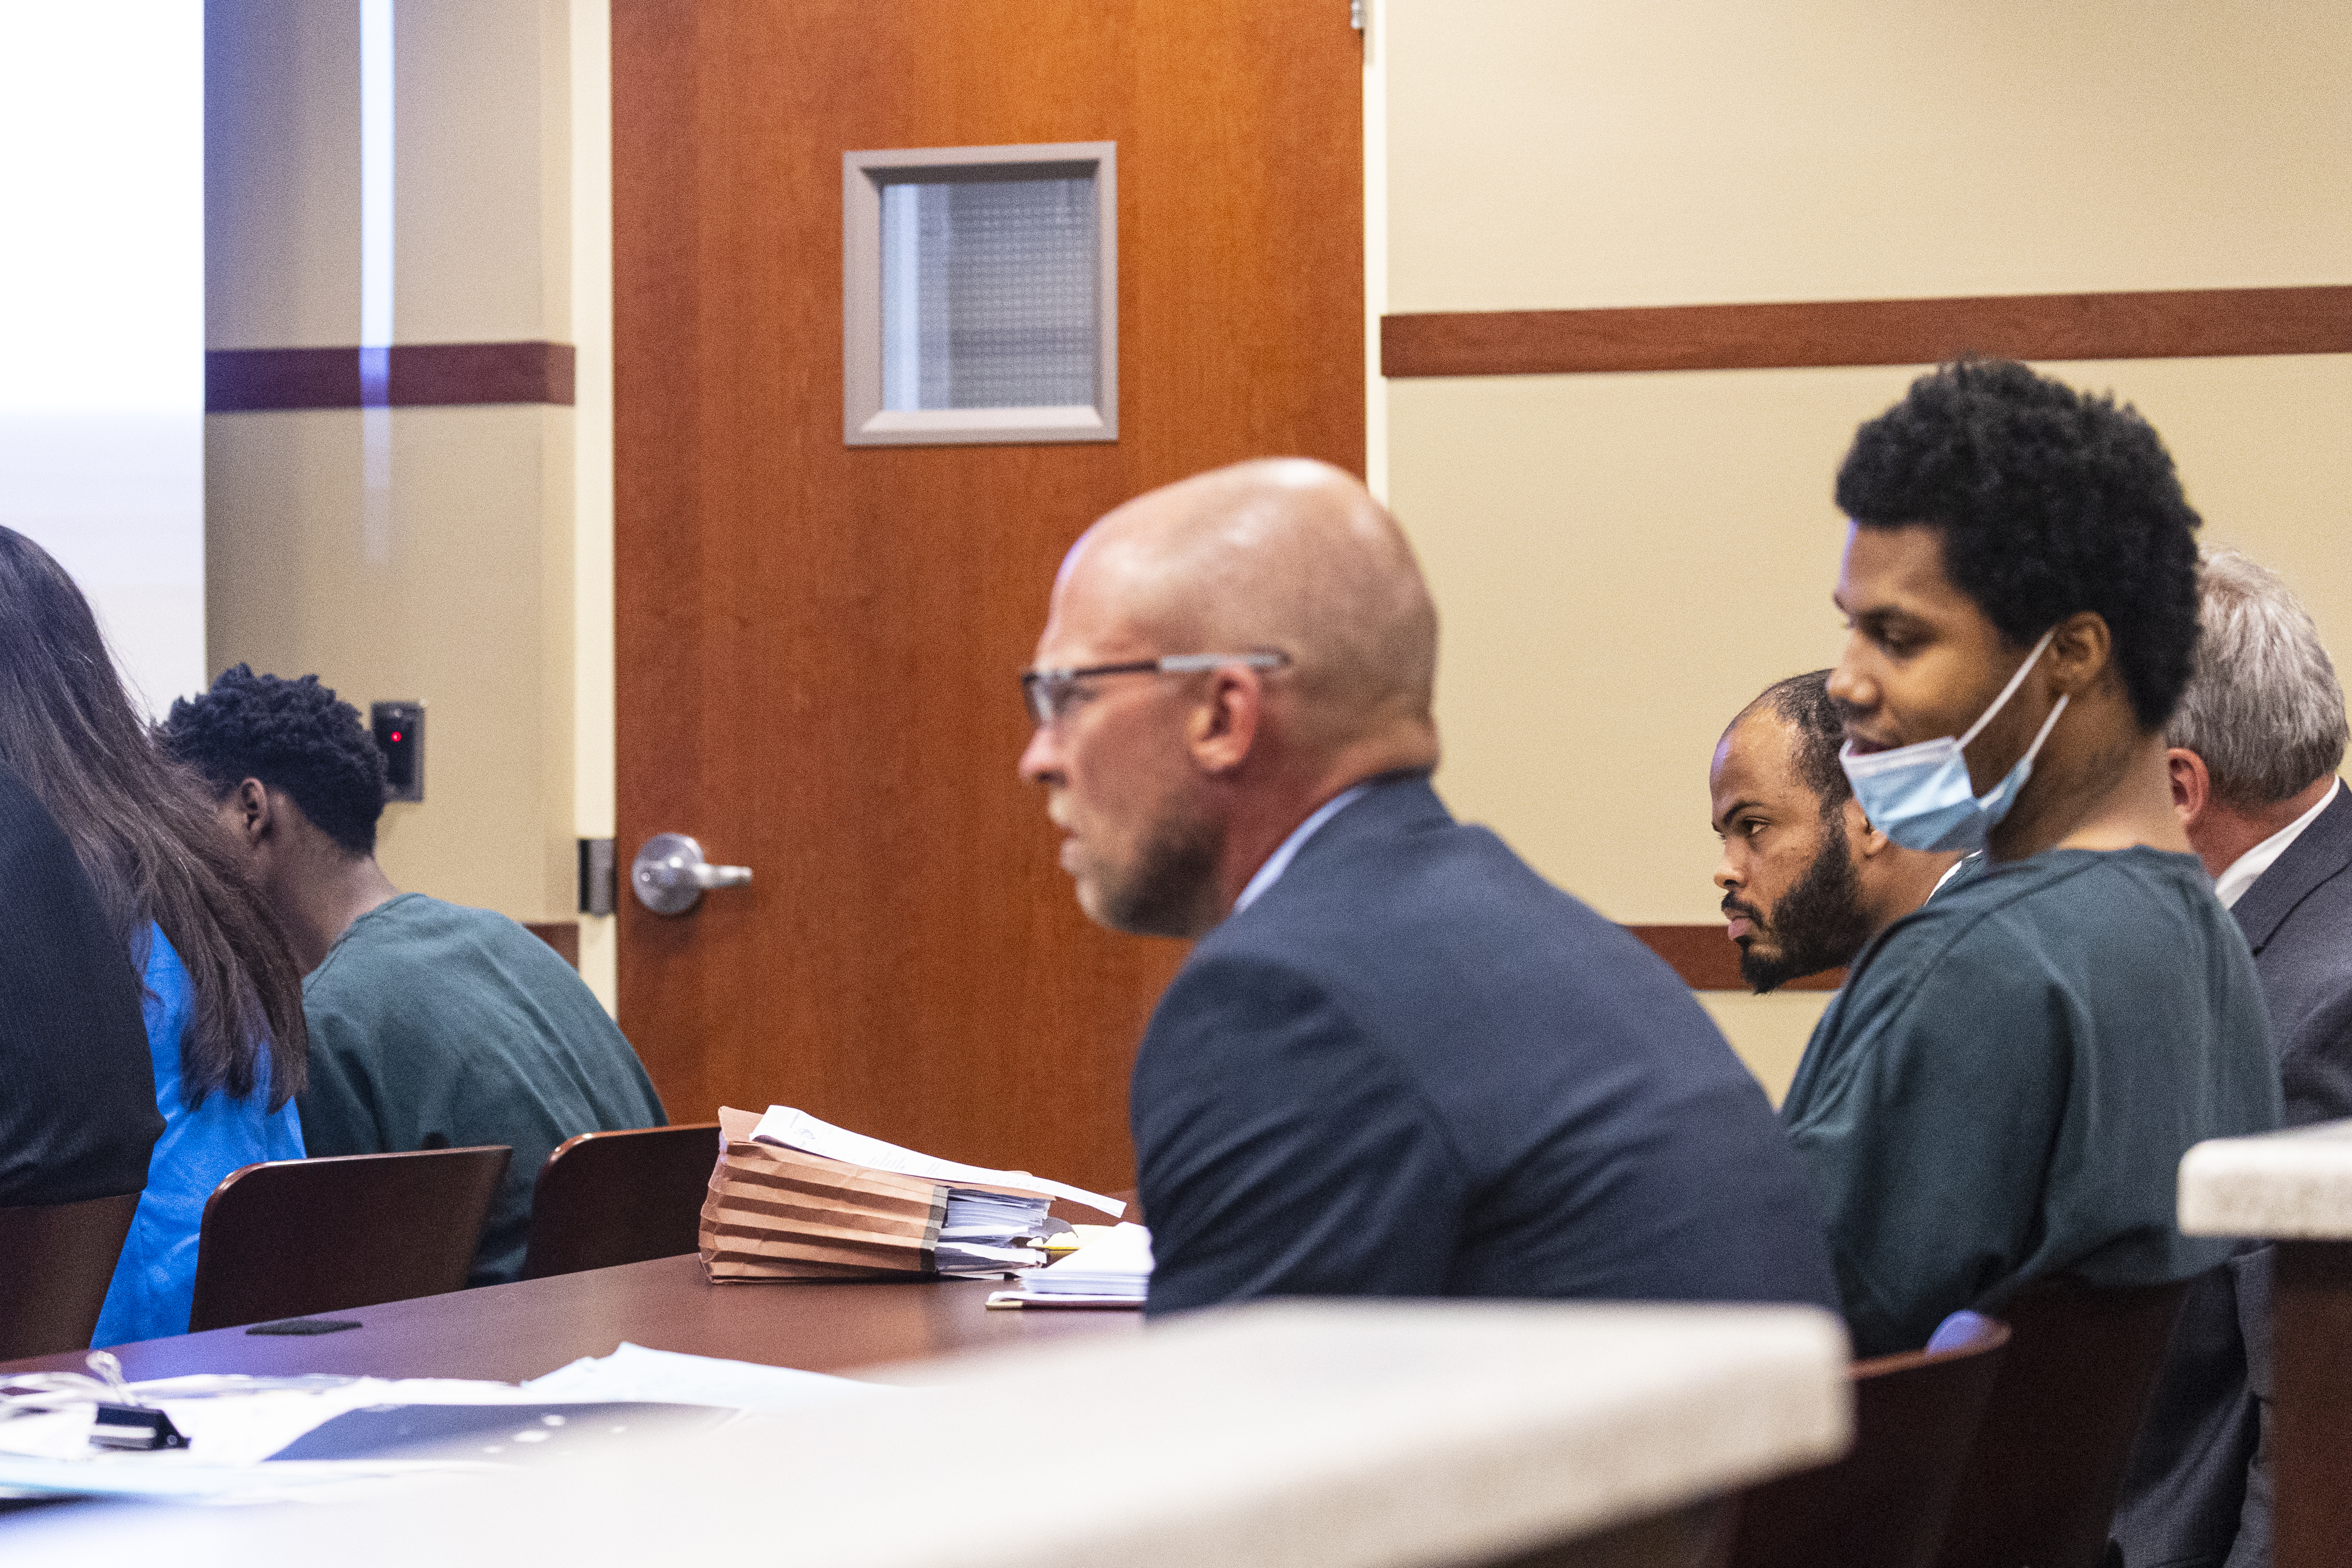 Rishy Manning, 22, Javonte Rosa, 23 and Jaheim Hayes-Goree, 20, appear for their preliminary hearing at the 63rd District Courthouse in Grand Rapids, Michigan on Thursday, June 30, 2022. The trio of defendants who appeared in court, are charged with felony murder in the shooting death of Joseph Wilder, 50, who was shot and killed during a robbery attempt at a Huntington Bank ATM on South Division Avenue in May of 2022.  (Joel Bissell | MLive.com)